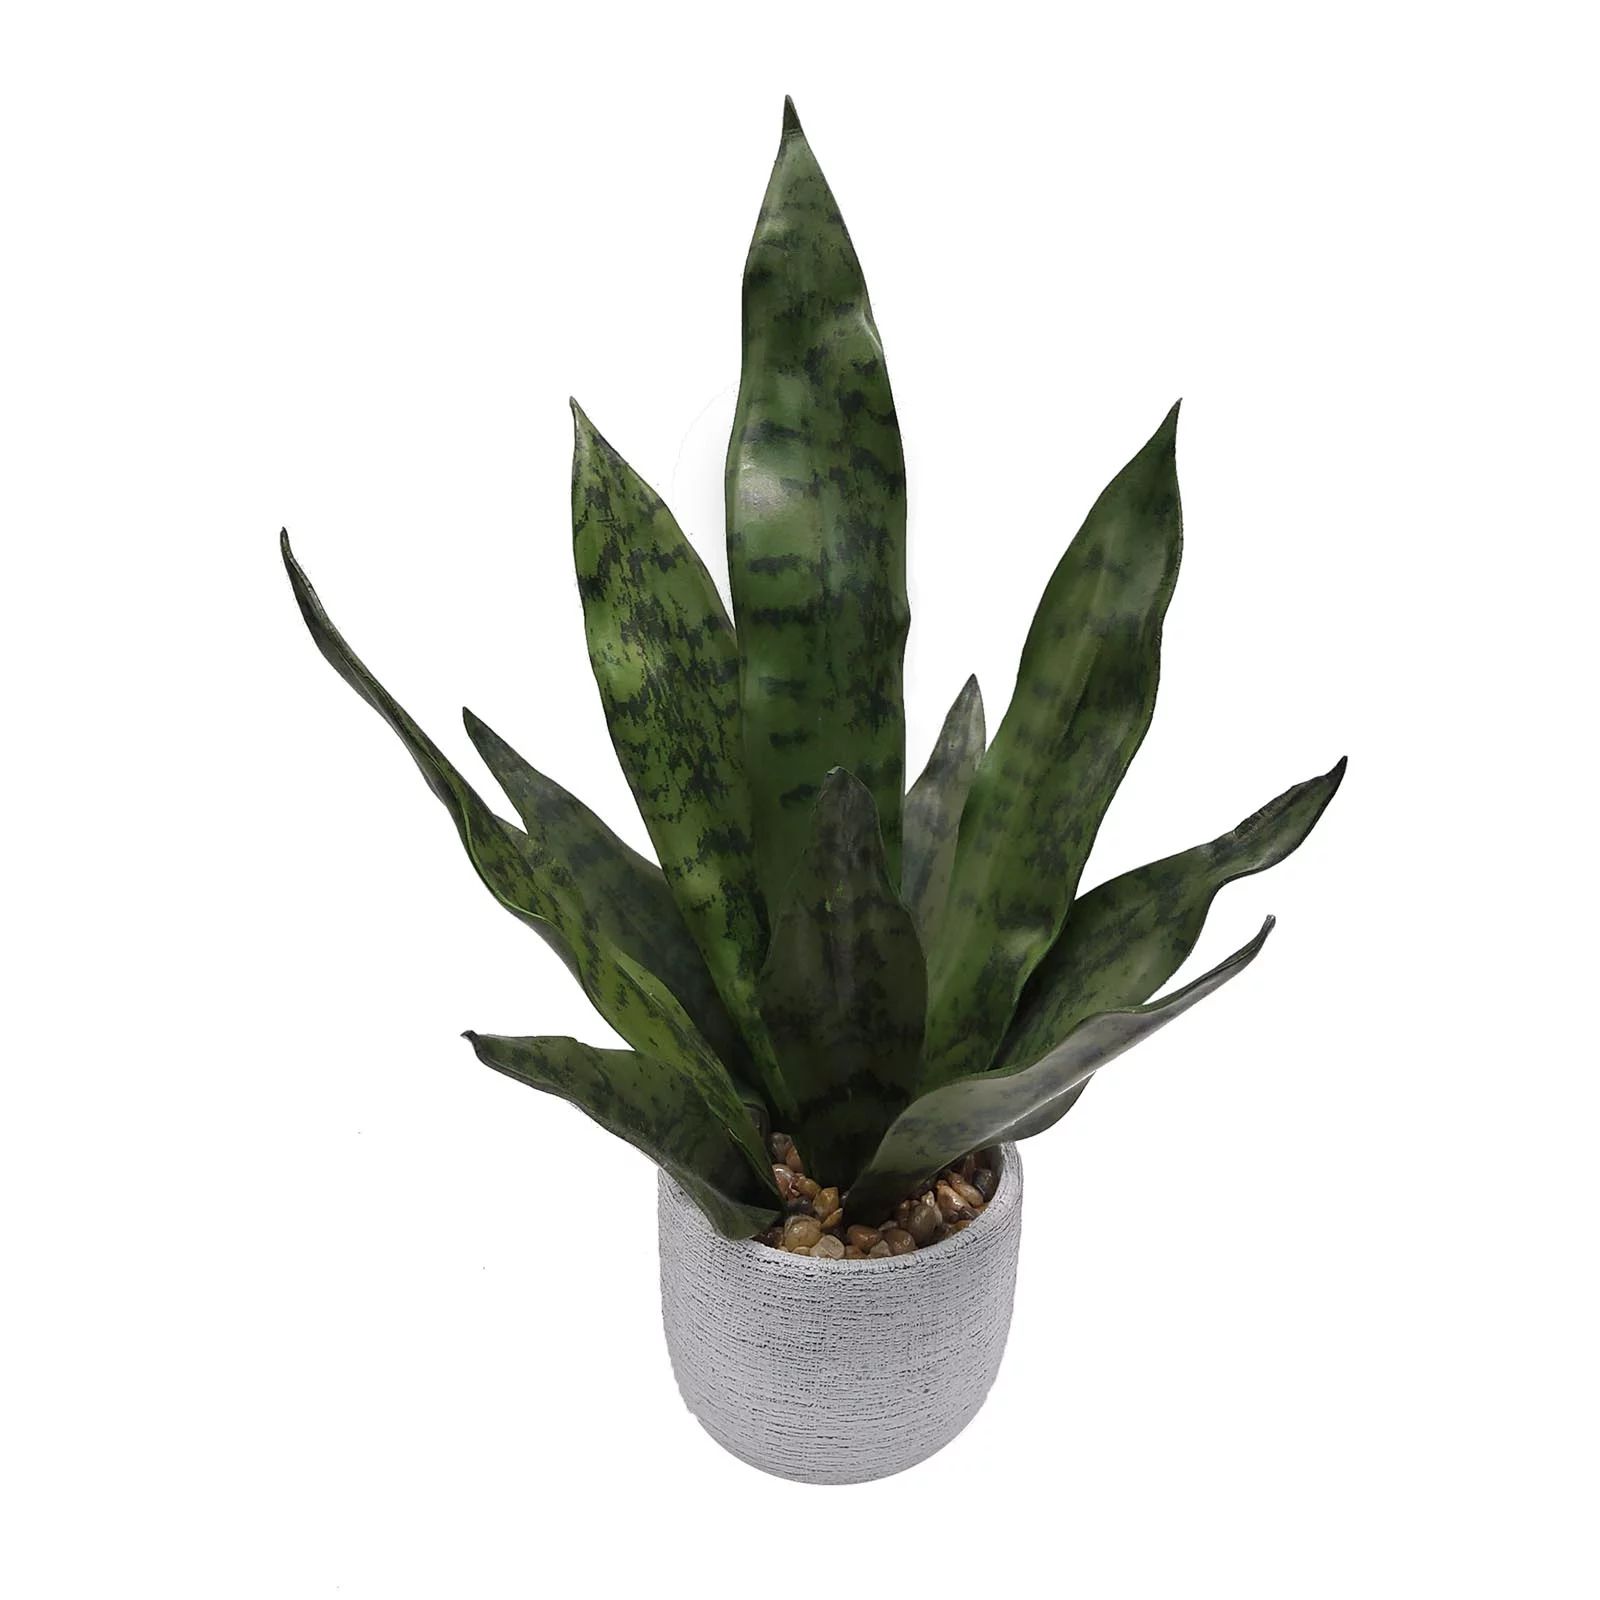 Mainstays 19" Artificial Snake Plant Decor in Pot, Green Color. | Walmart (US)